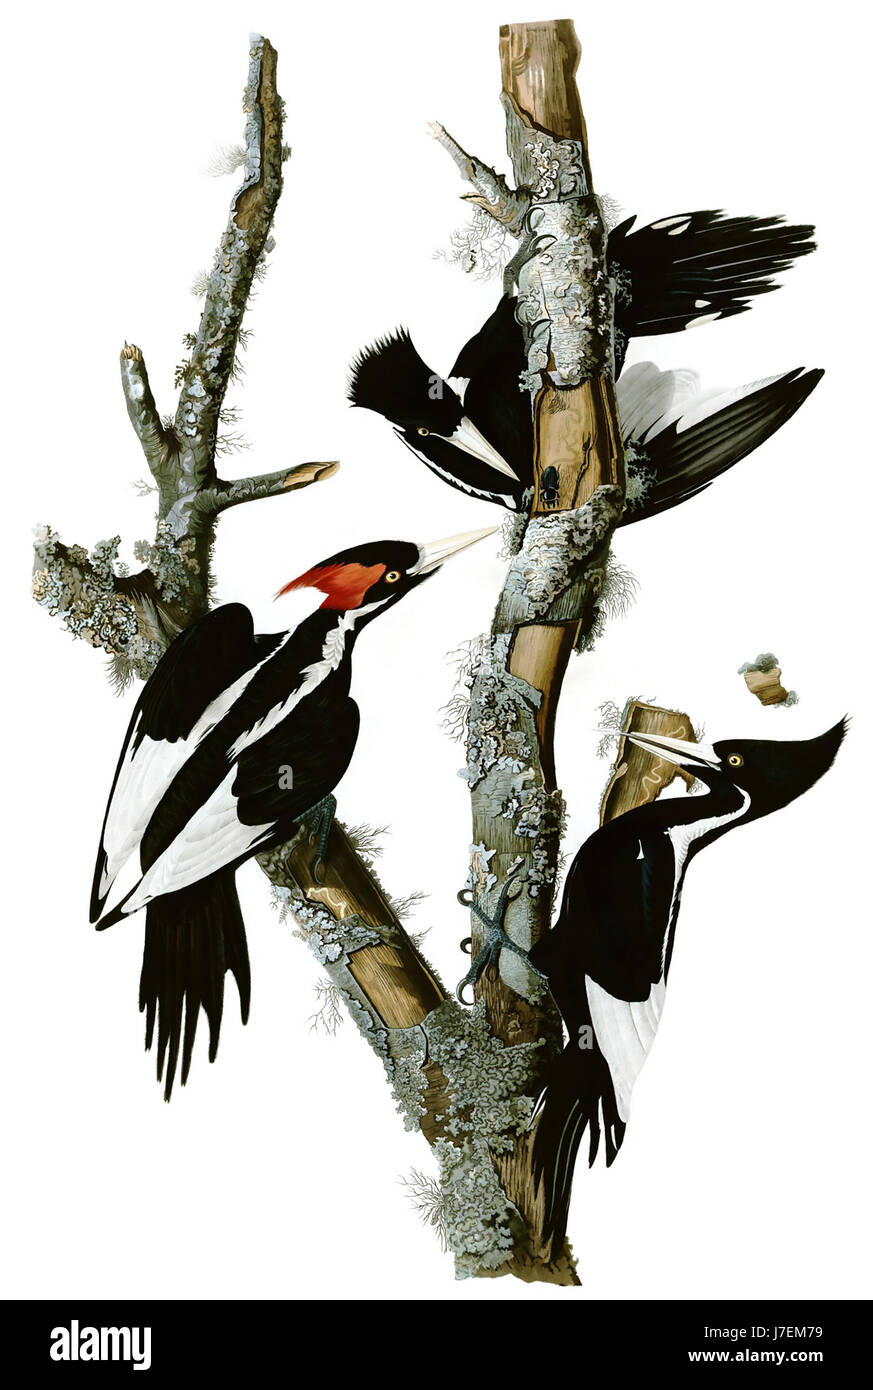 JOHN JAMES AUDUBON (1785-1851) Franco-American naturalist, ornithologist and painter. A plate showing Ivory Billed Woodpeckers from his 'Birds of America' published between 1827 and 1838 Stock Photo